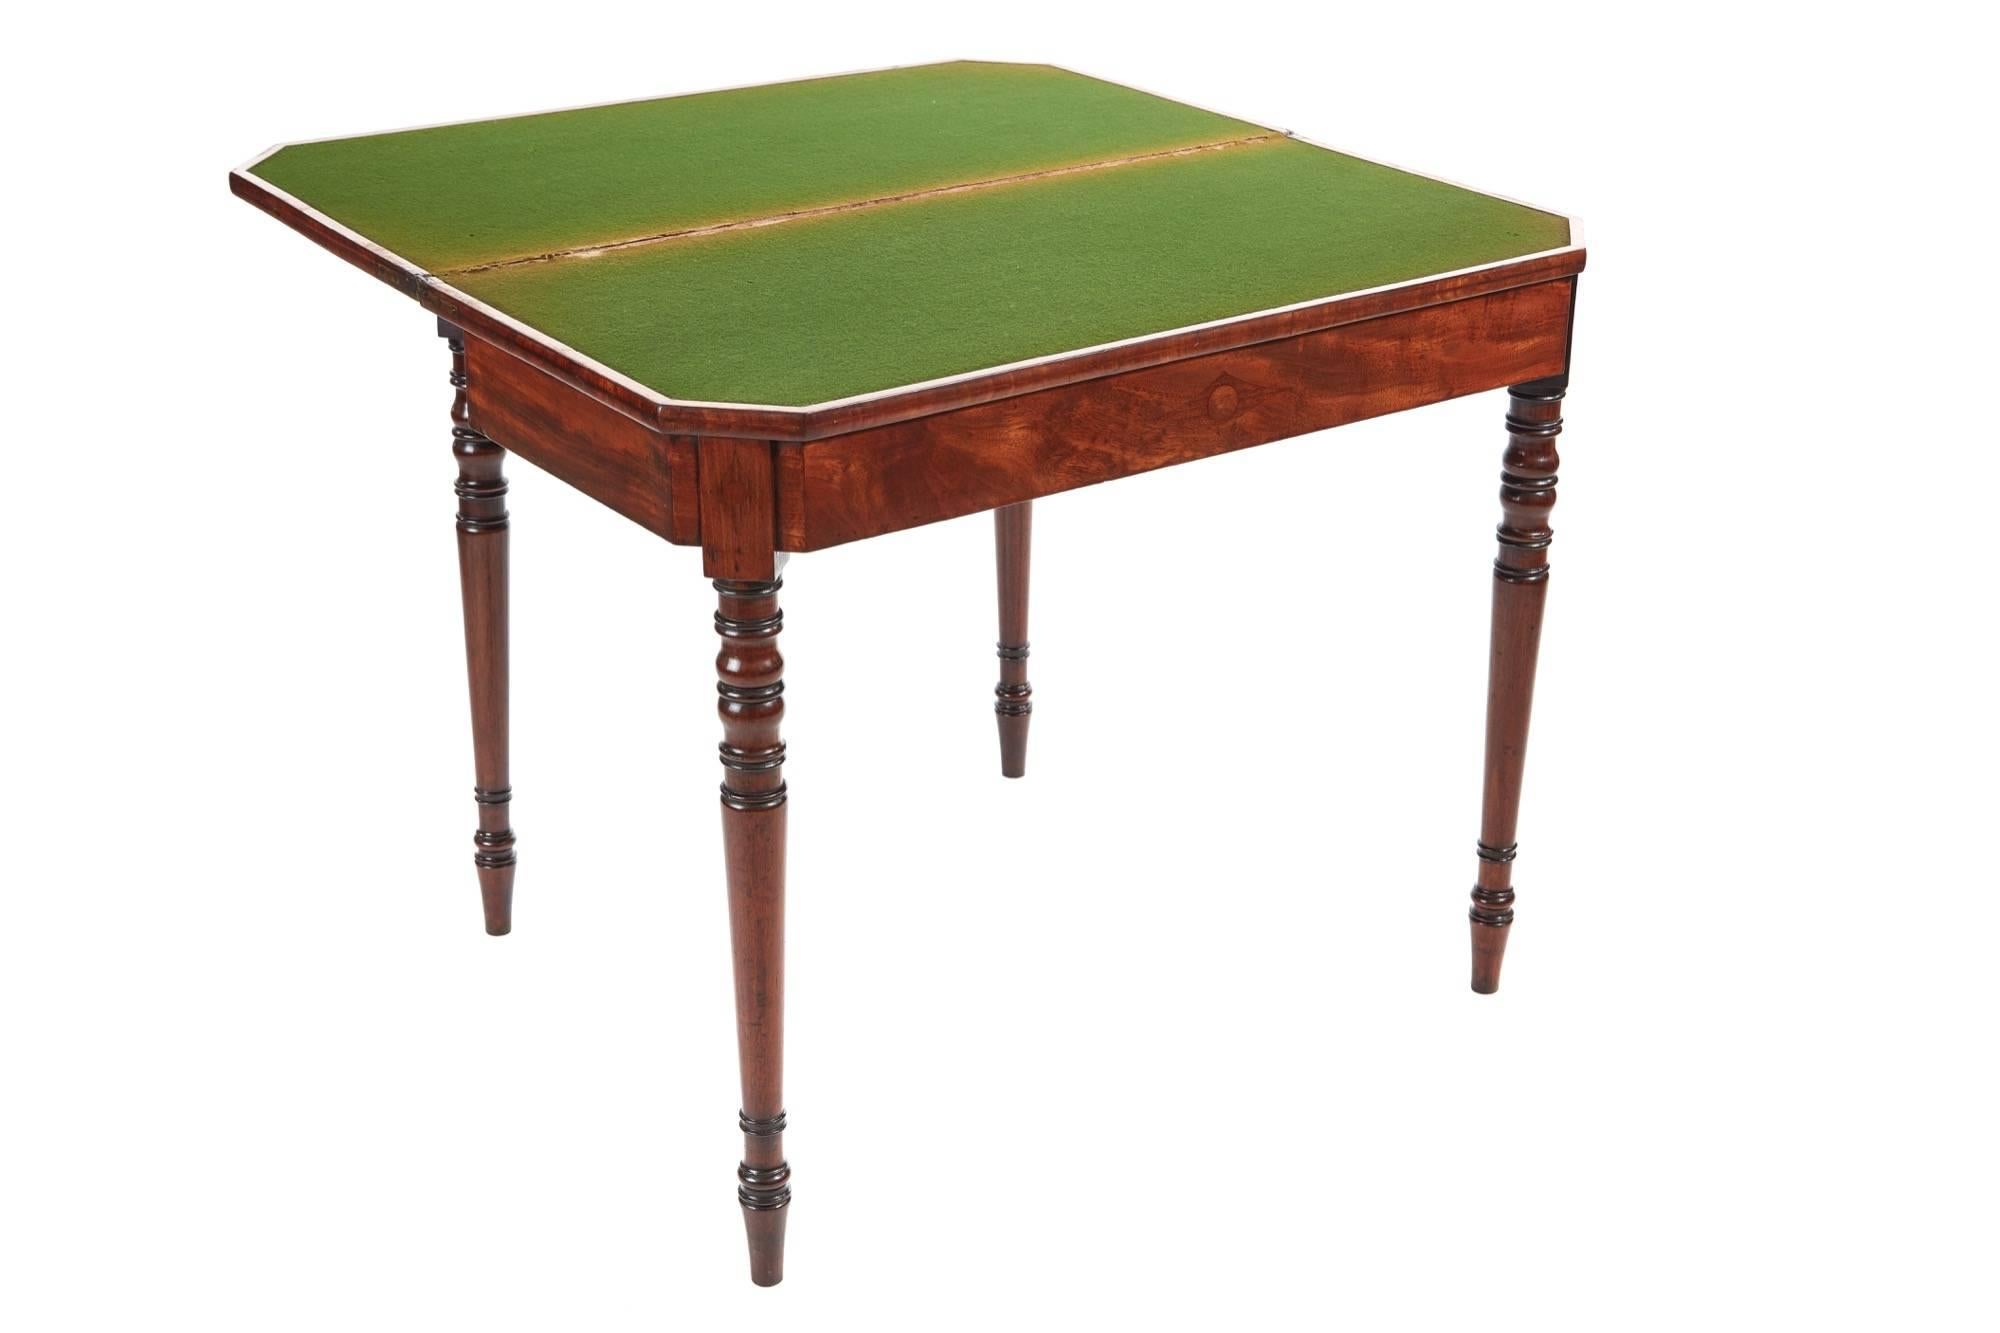 George III mahogany card table, with a lovely quality mahogany top, crossbanded in rosewood, original green baize and satinwood crossbanding, double gateleg support for the hinged fold over top, inlaid frieze, standing on turned legs.